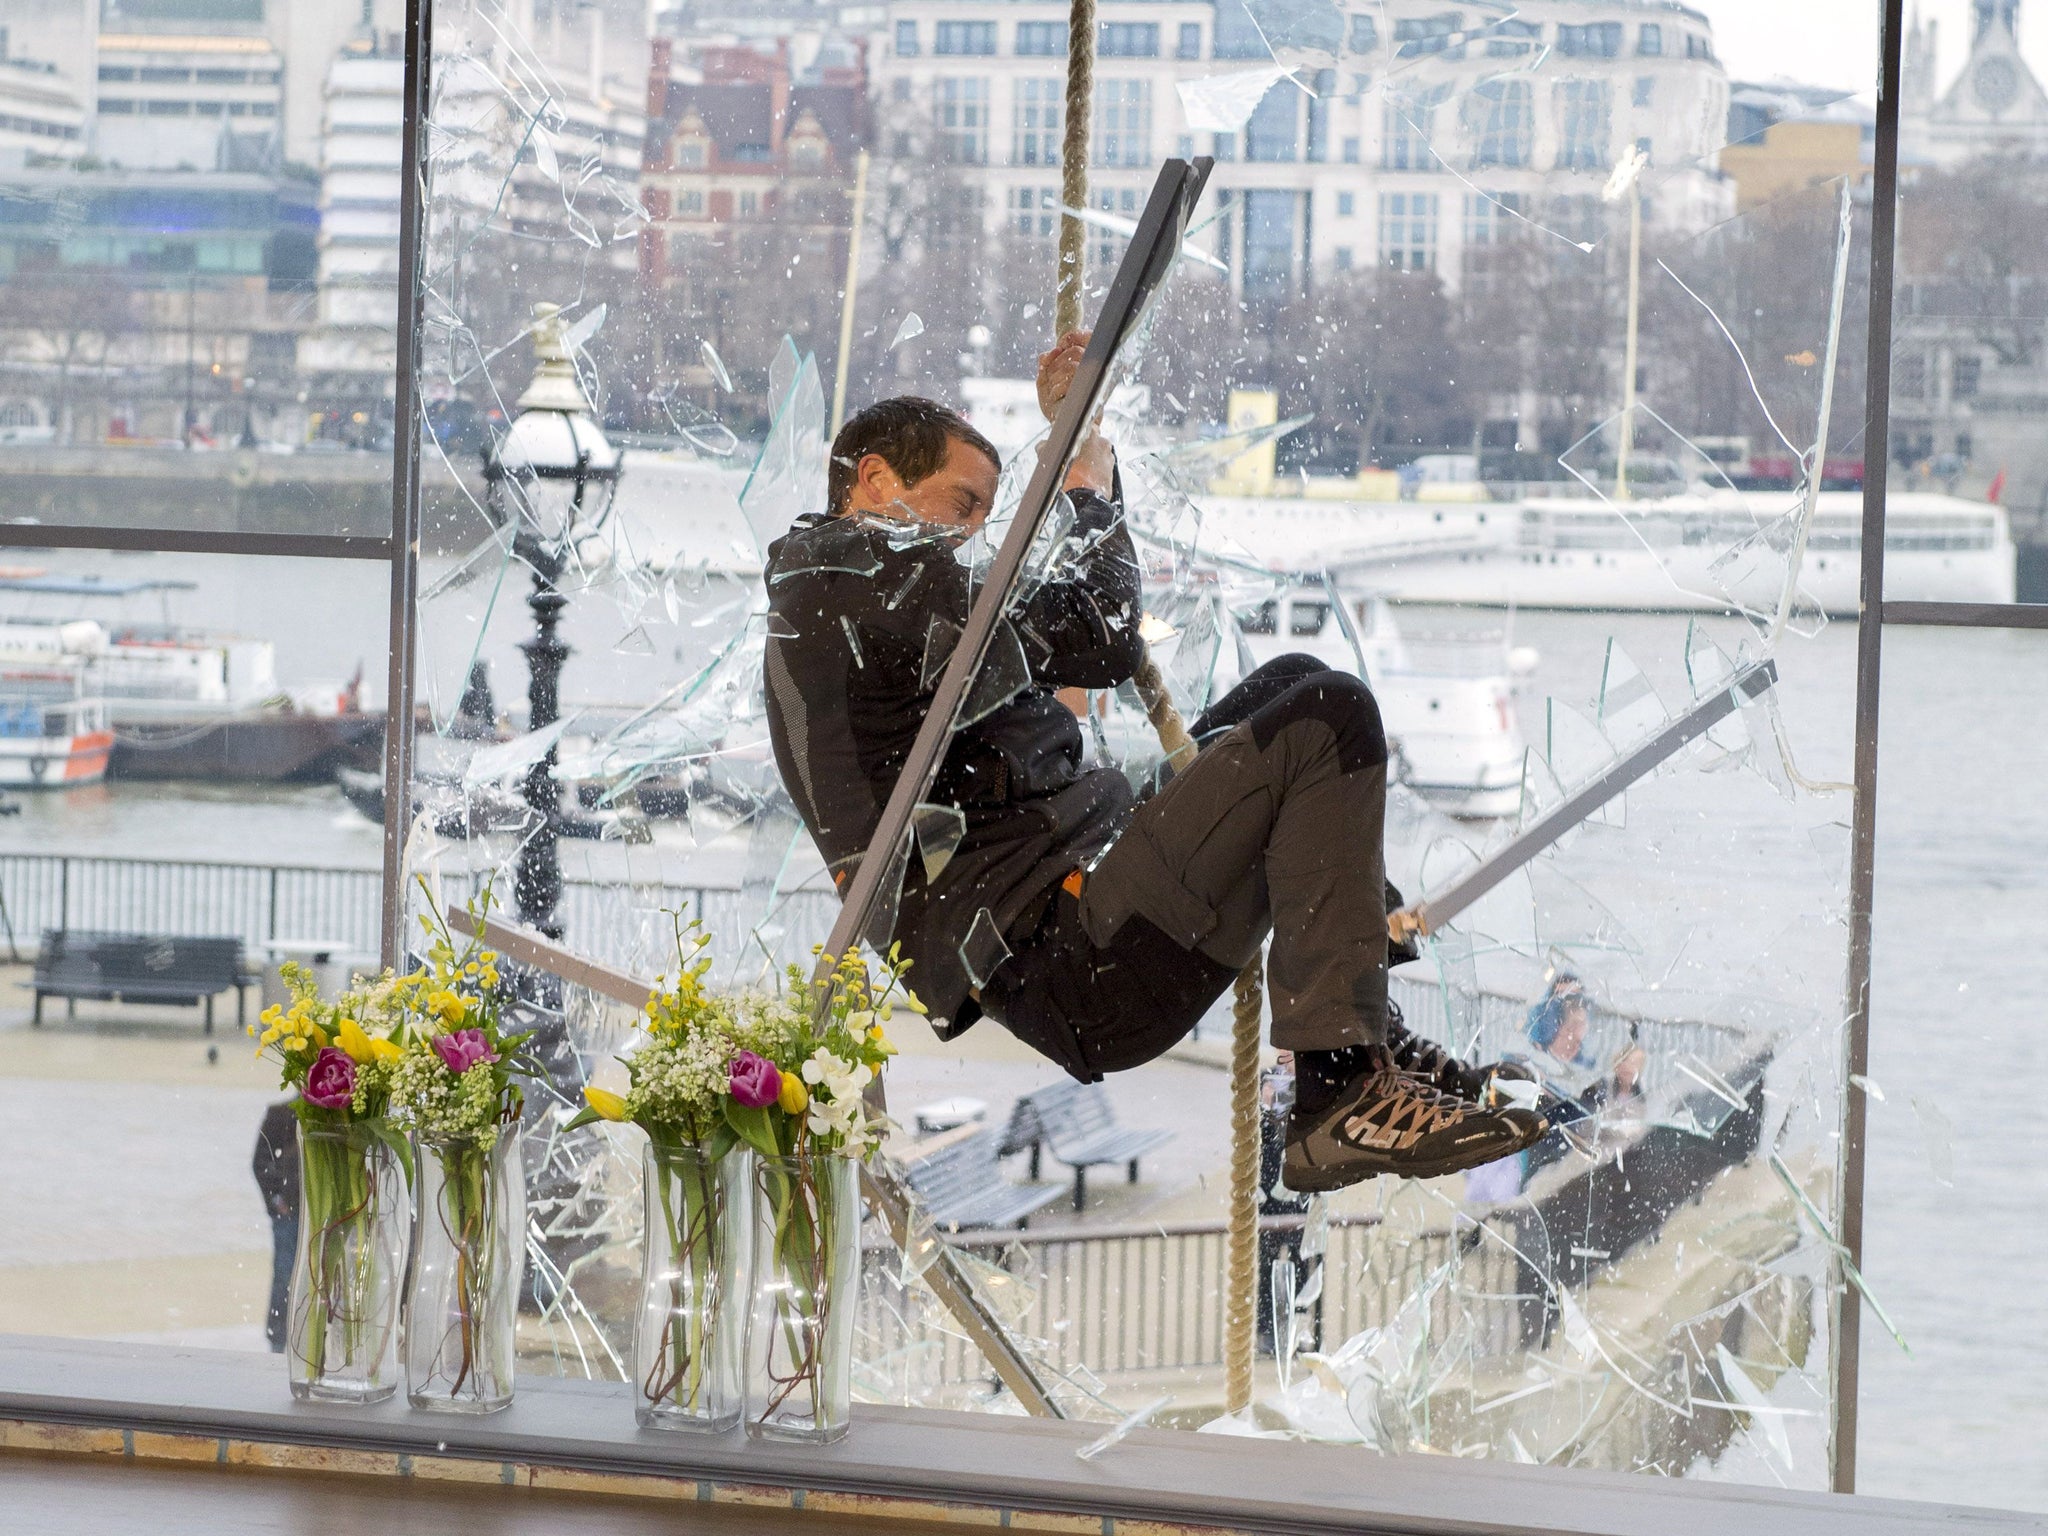 Bear Grylls swung through the windows of ITV's This Morning on Friday 13 February